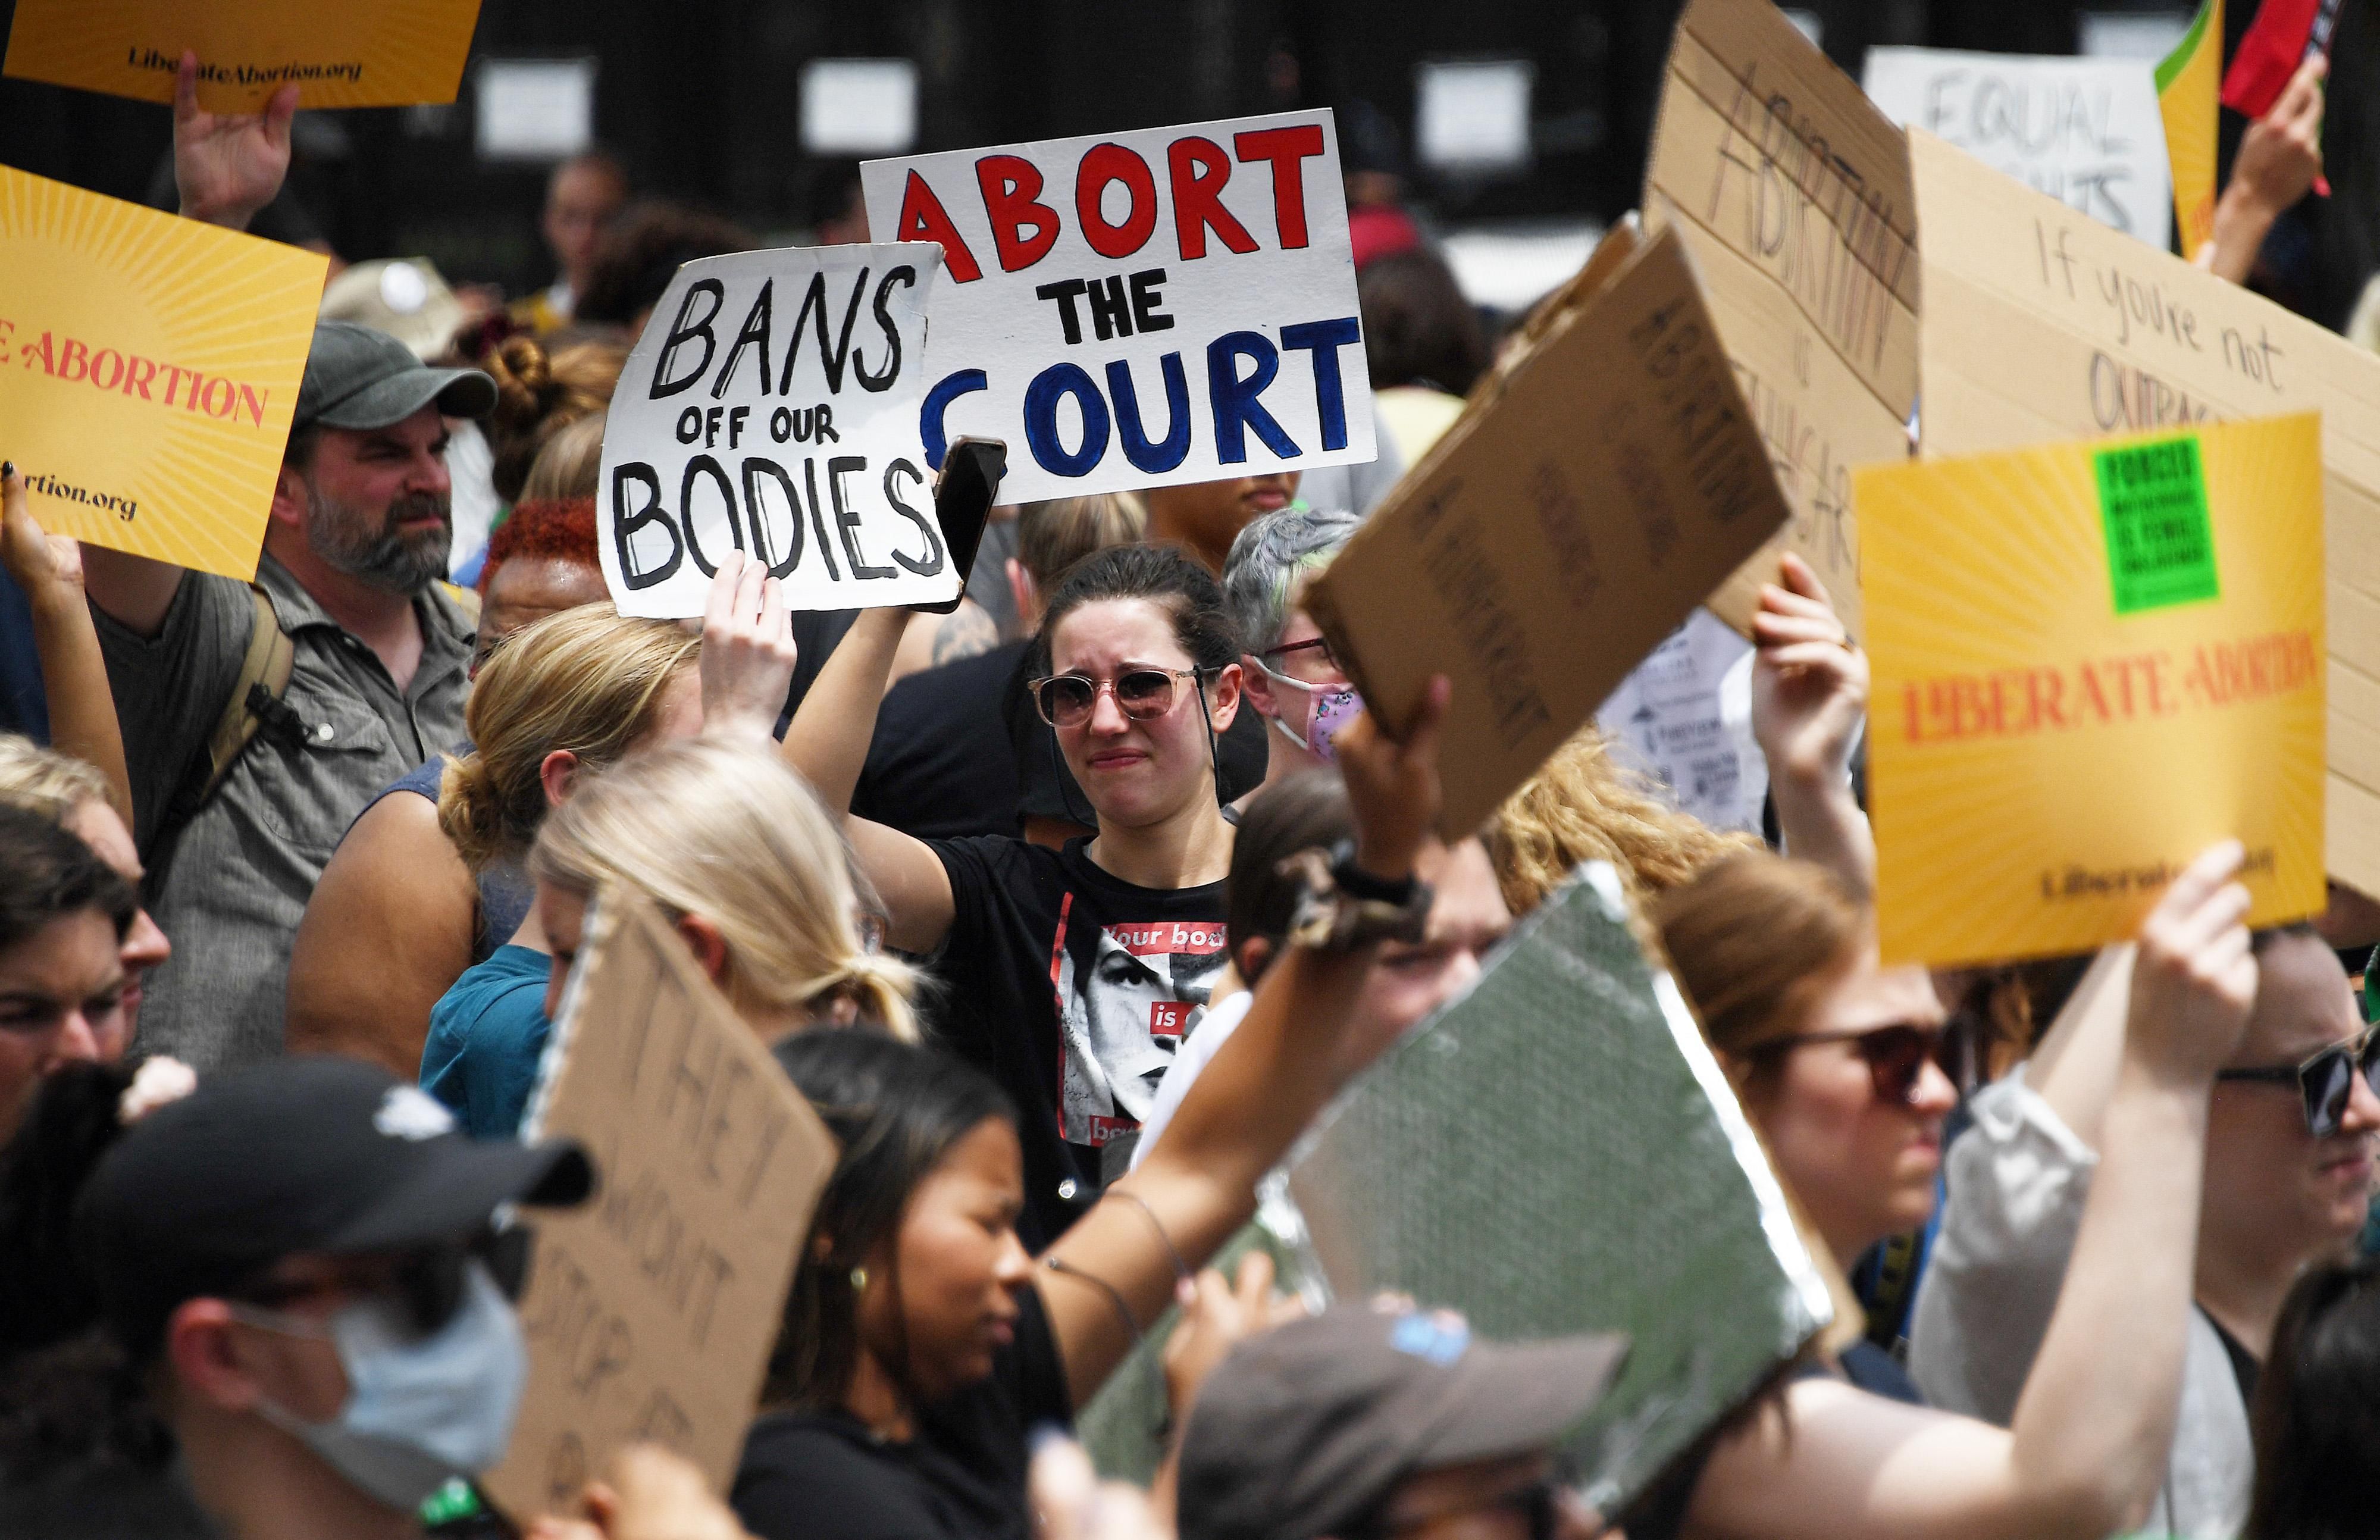 Abortion rights activists hoist their signs outside the U.S. Supreme Court in Washington, D.C. on June 24, 2022.